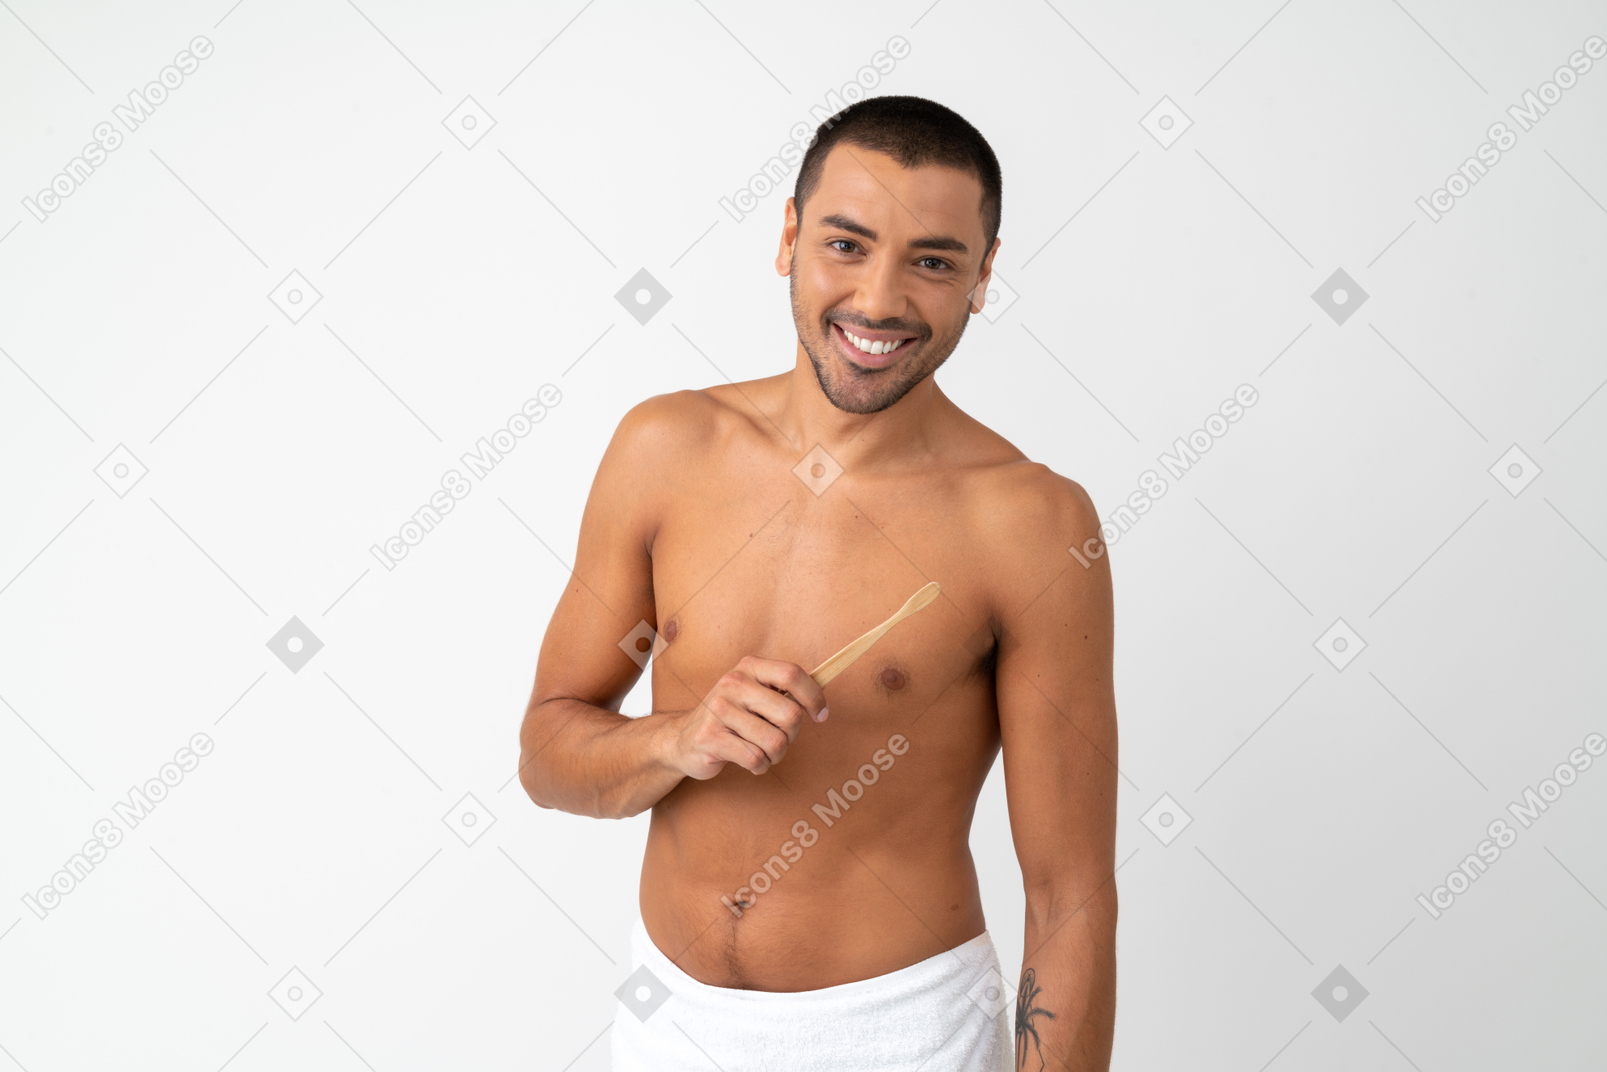 Barechested young man with nice smile holding a toothbrush